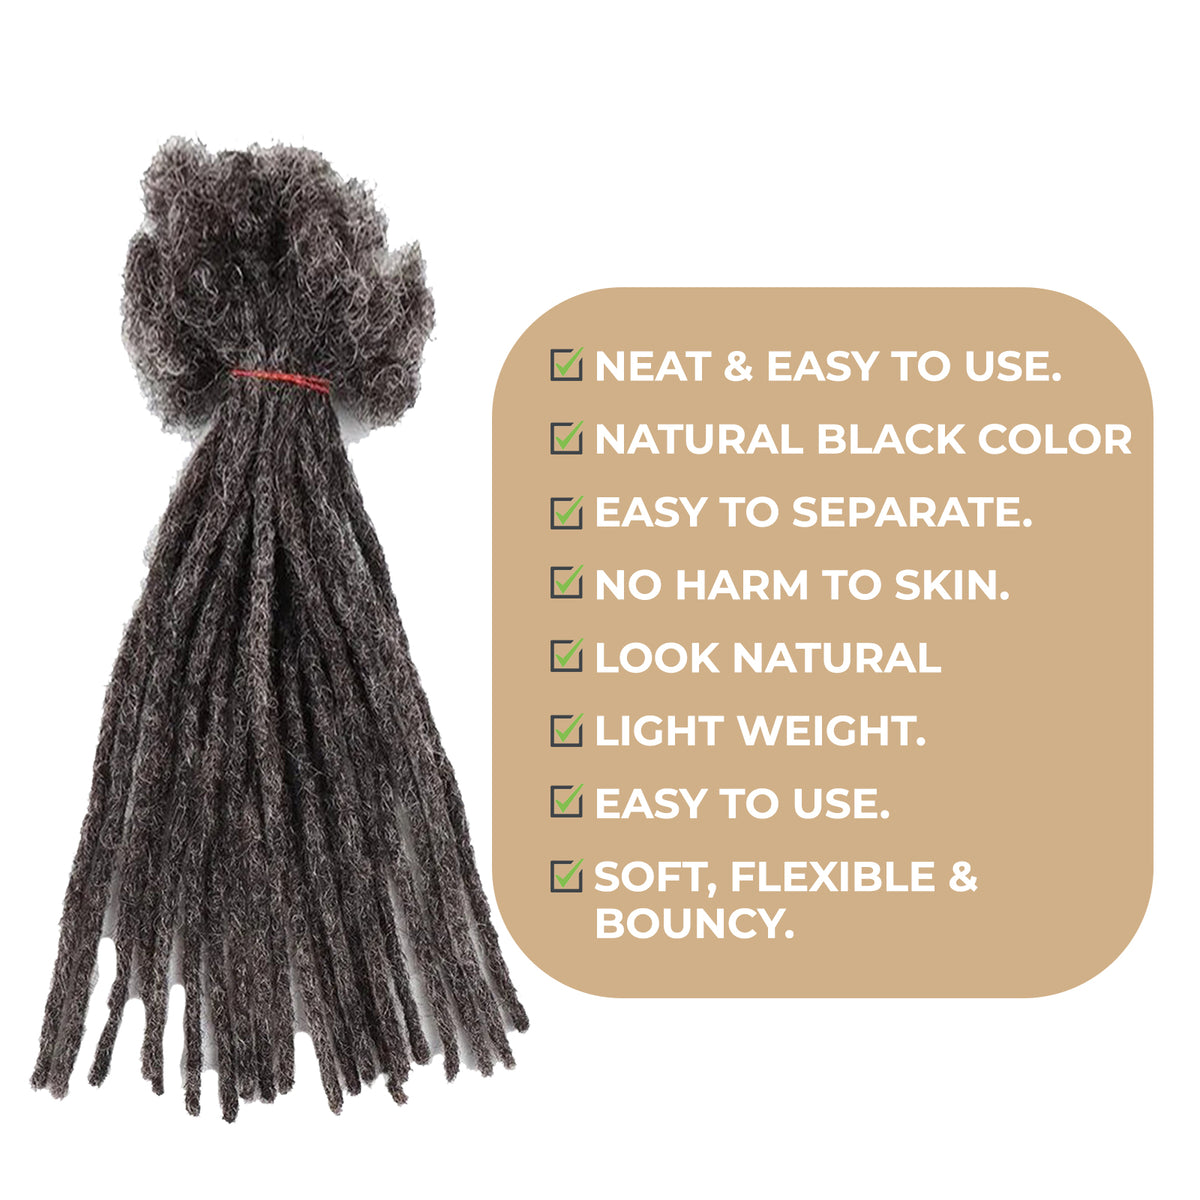 100% Human Hair Dreadlock Extensions 16 Inch 10 Strands Handmade Natural Loc Extensions Human Hair Dreads Extensions For Woman & Men Can Be Dyed/Bleached  (16inch 10 strands, 0.4cm Salt & Pepper)